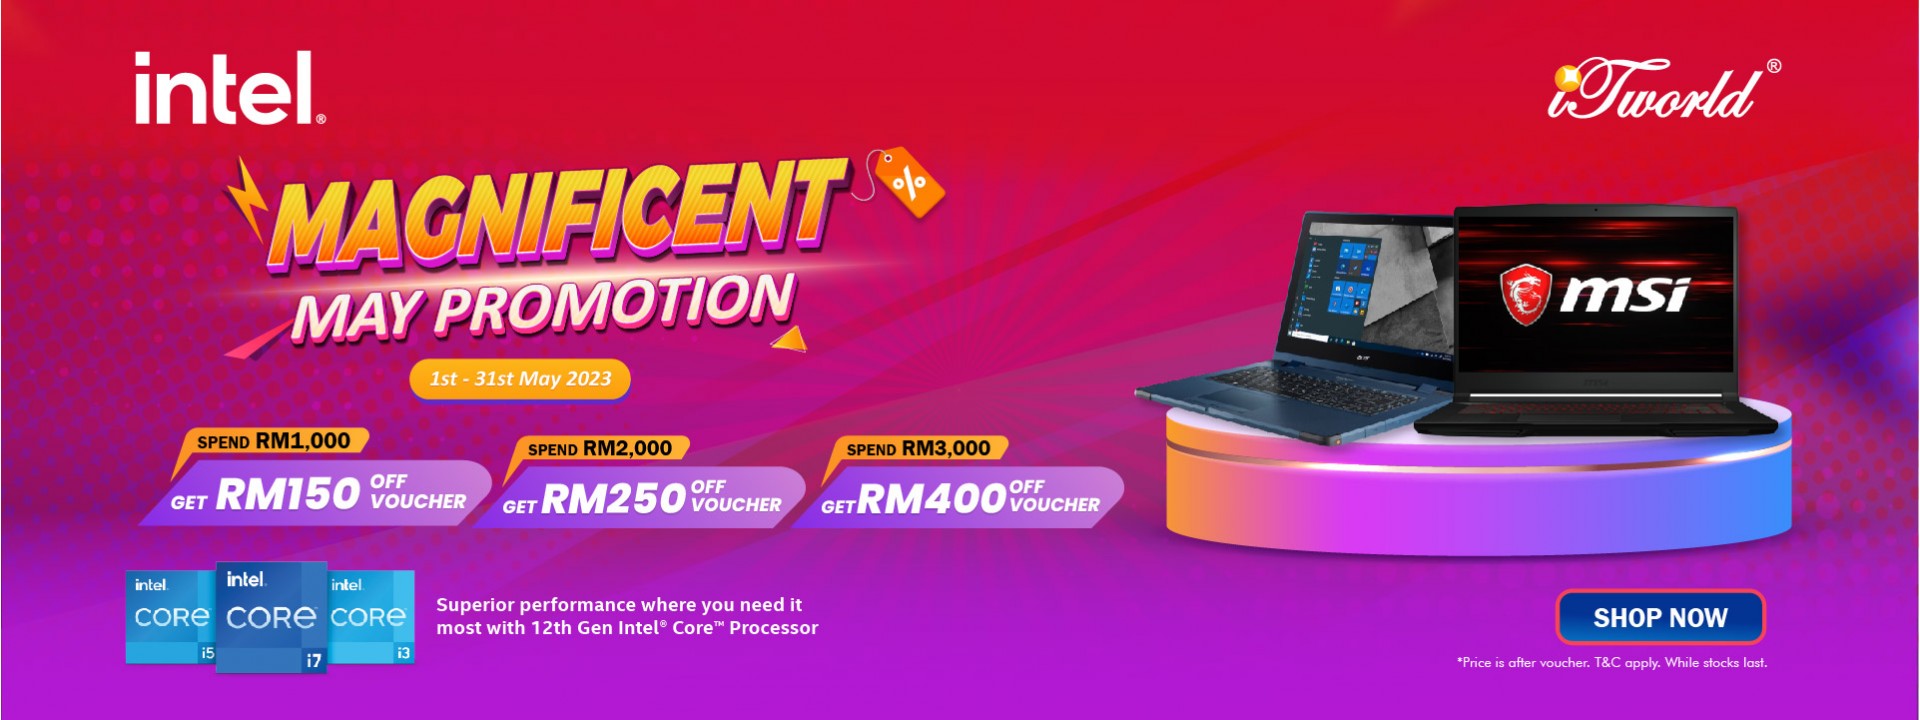 mnc-magnificent-may-promo